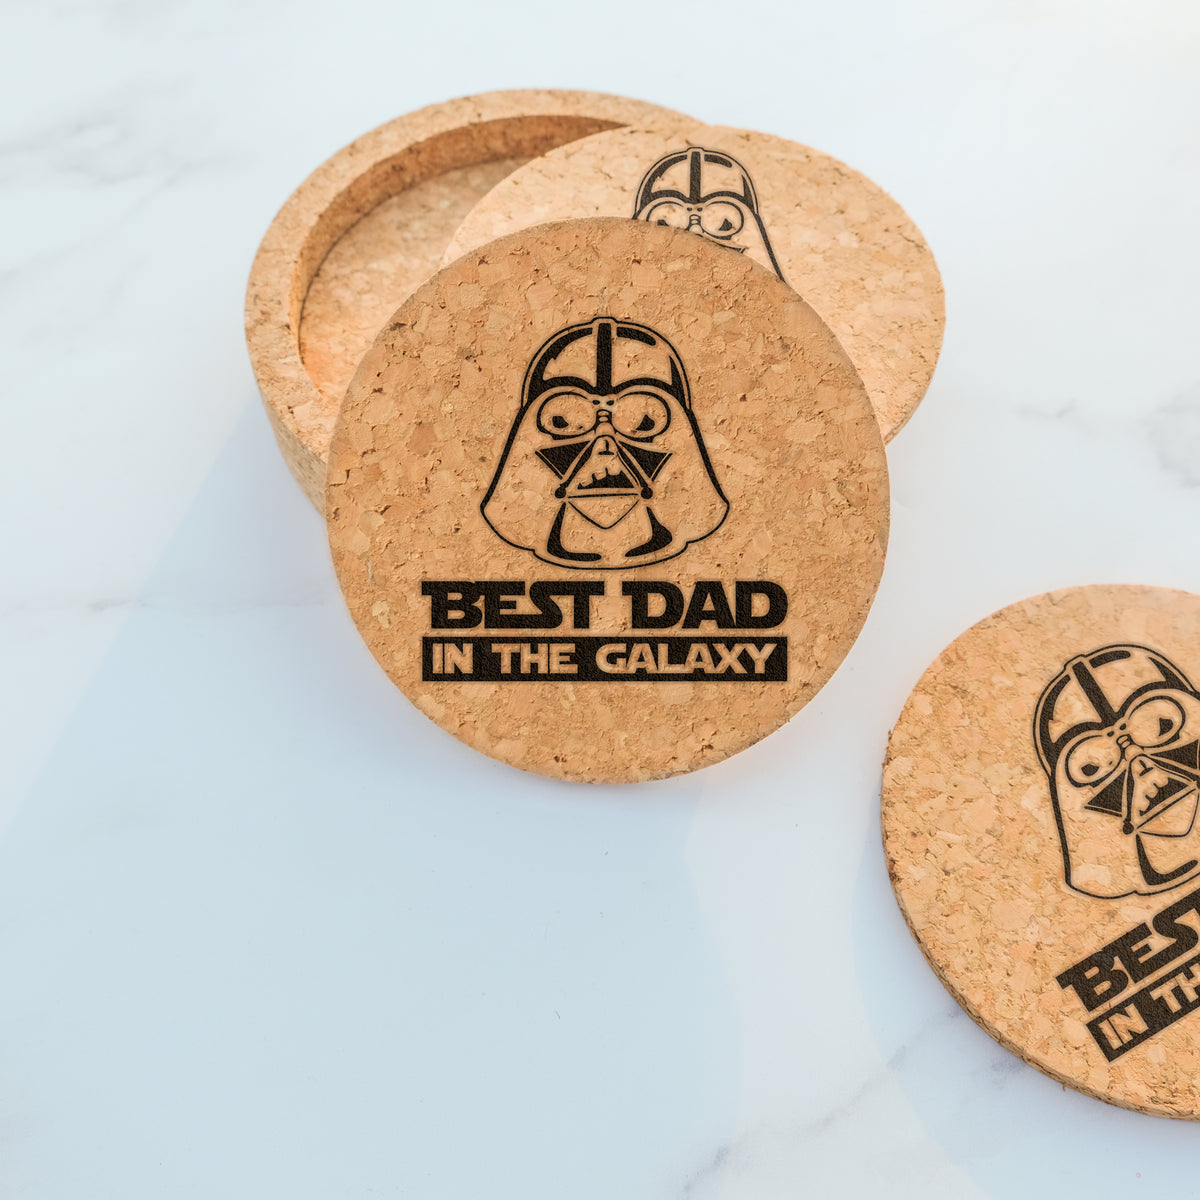  Set of 6 Wood Coasters - Star Wars New Collection